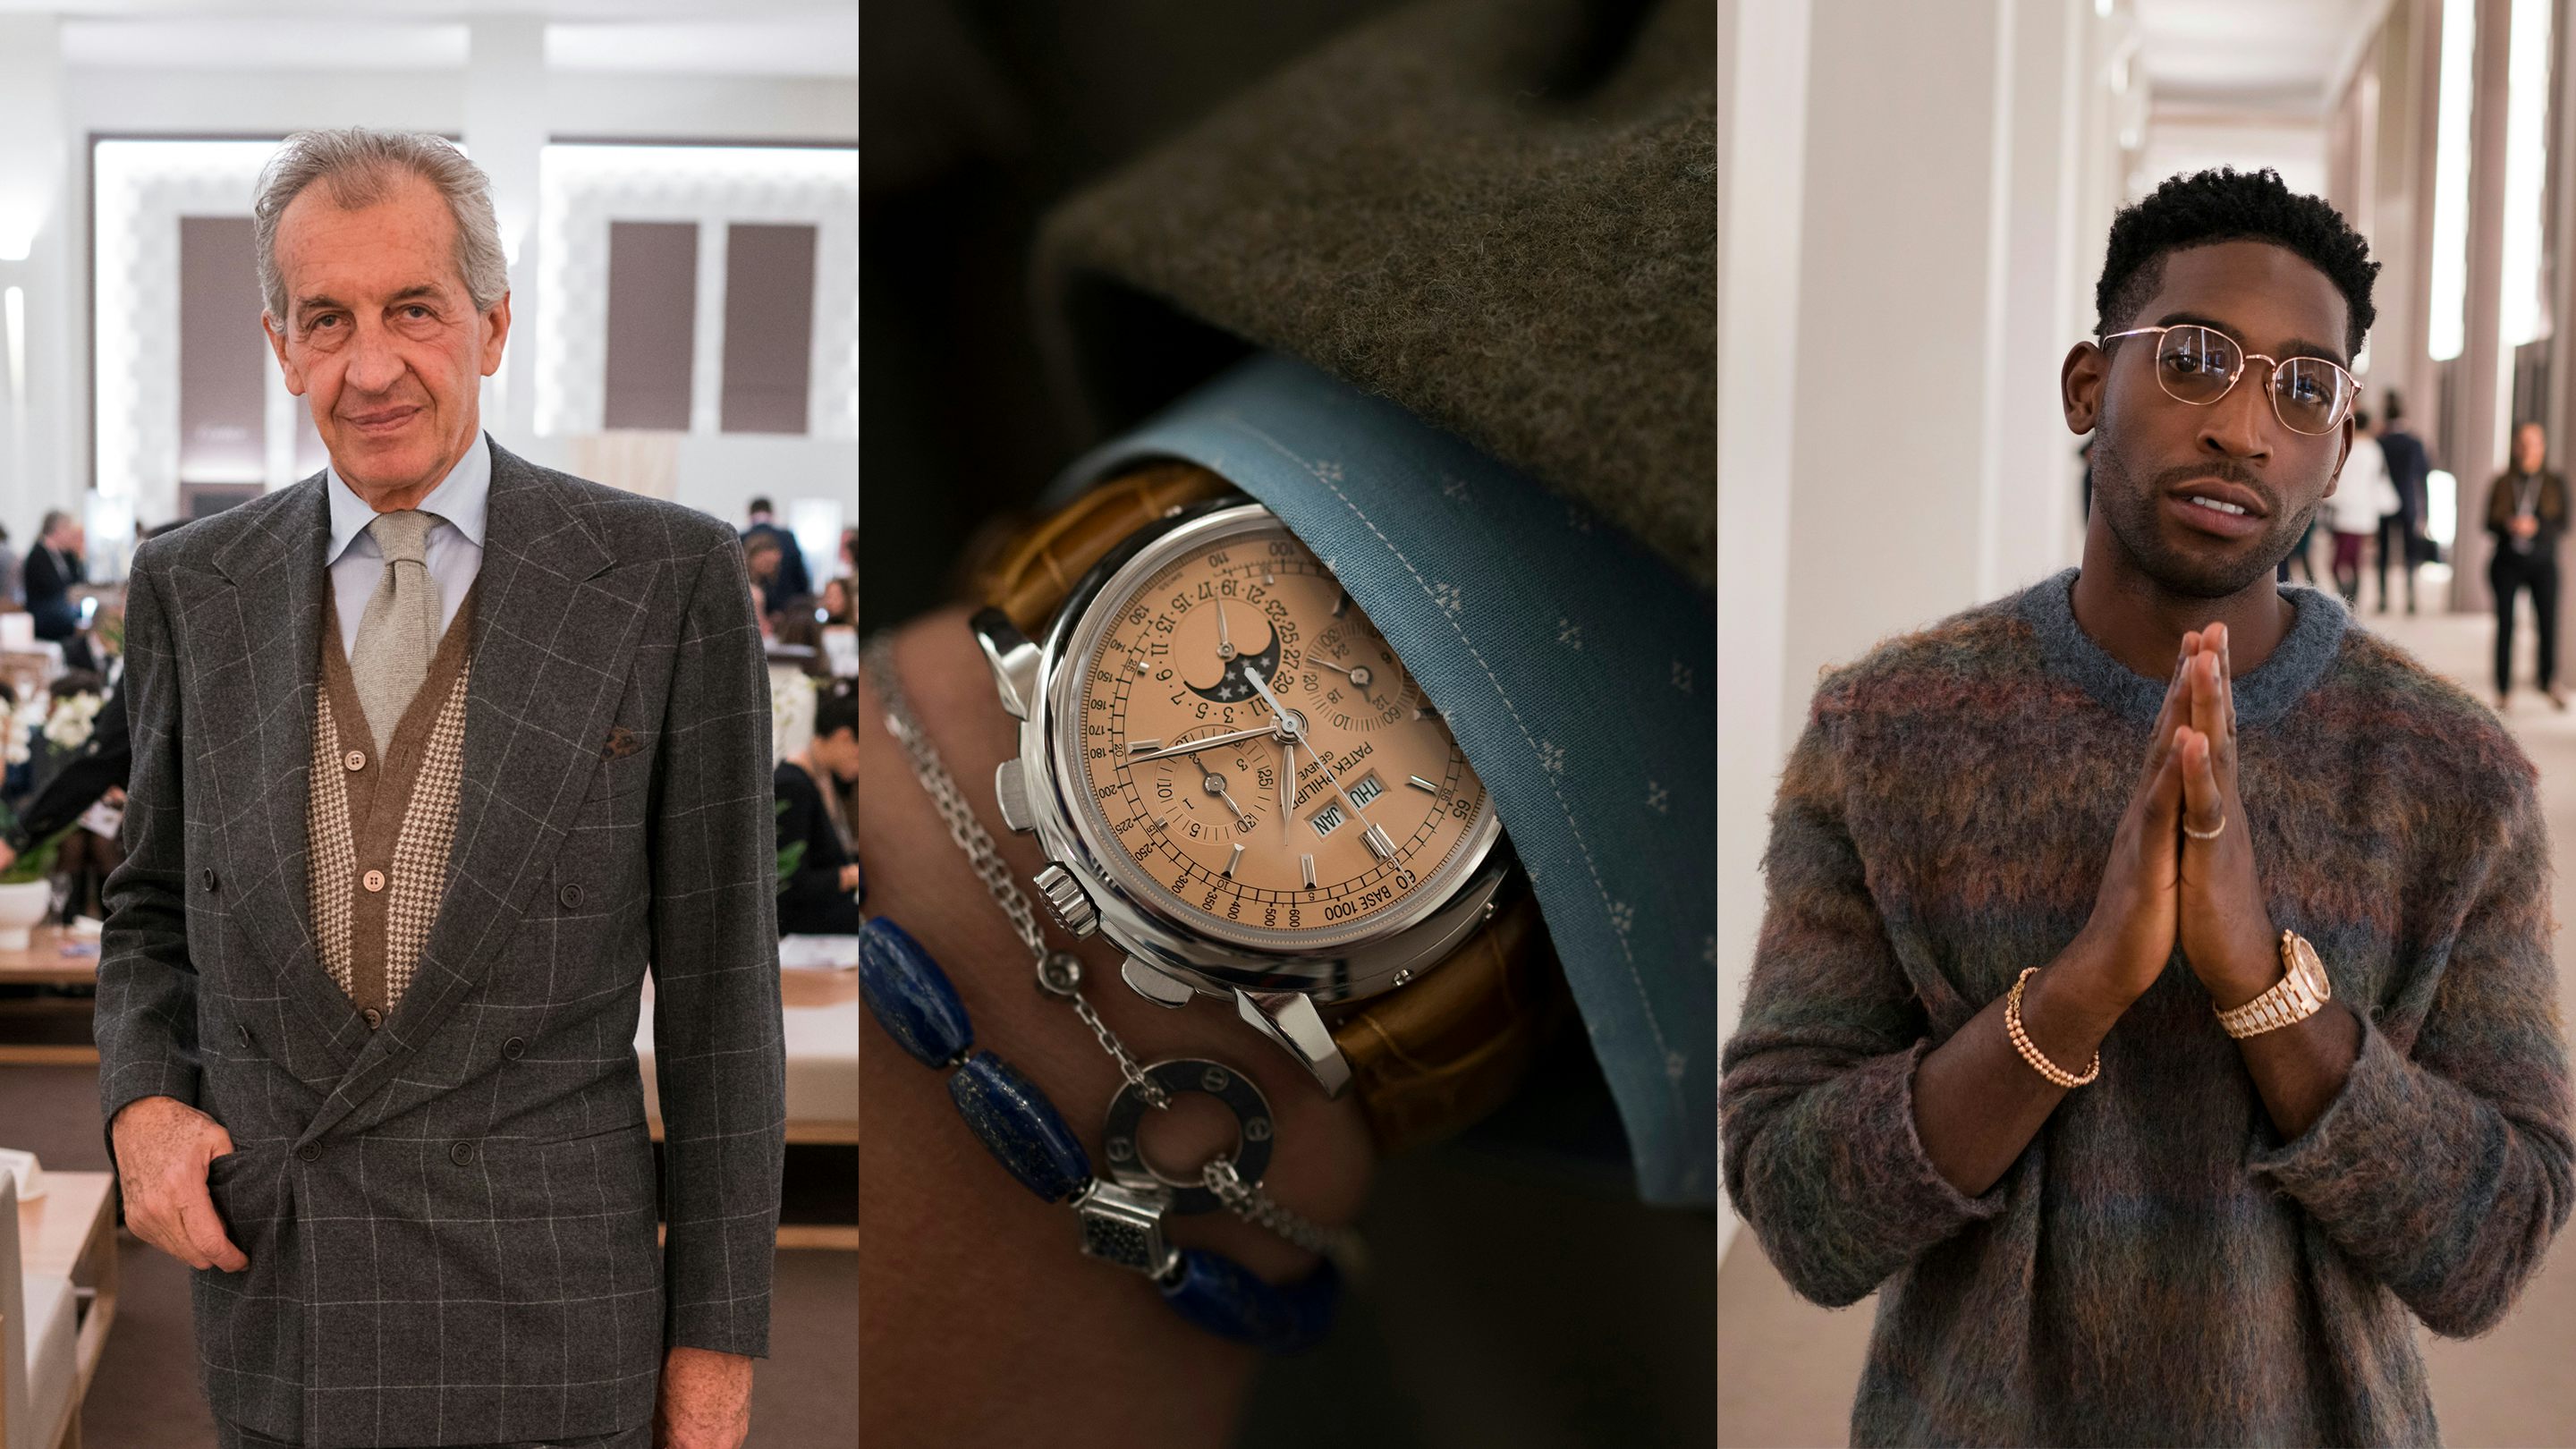 Photo Report: The Fashion And Watches Of SIHH 2018 - Hodinkee